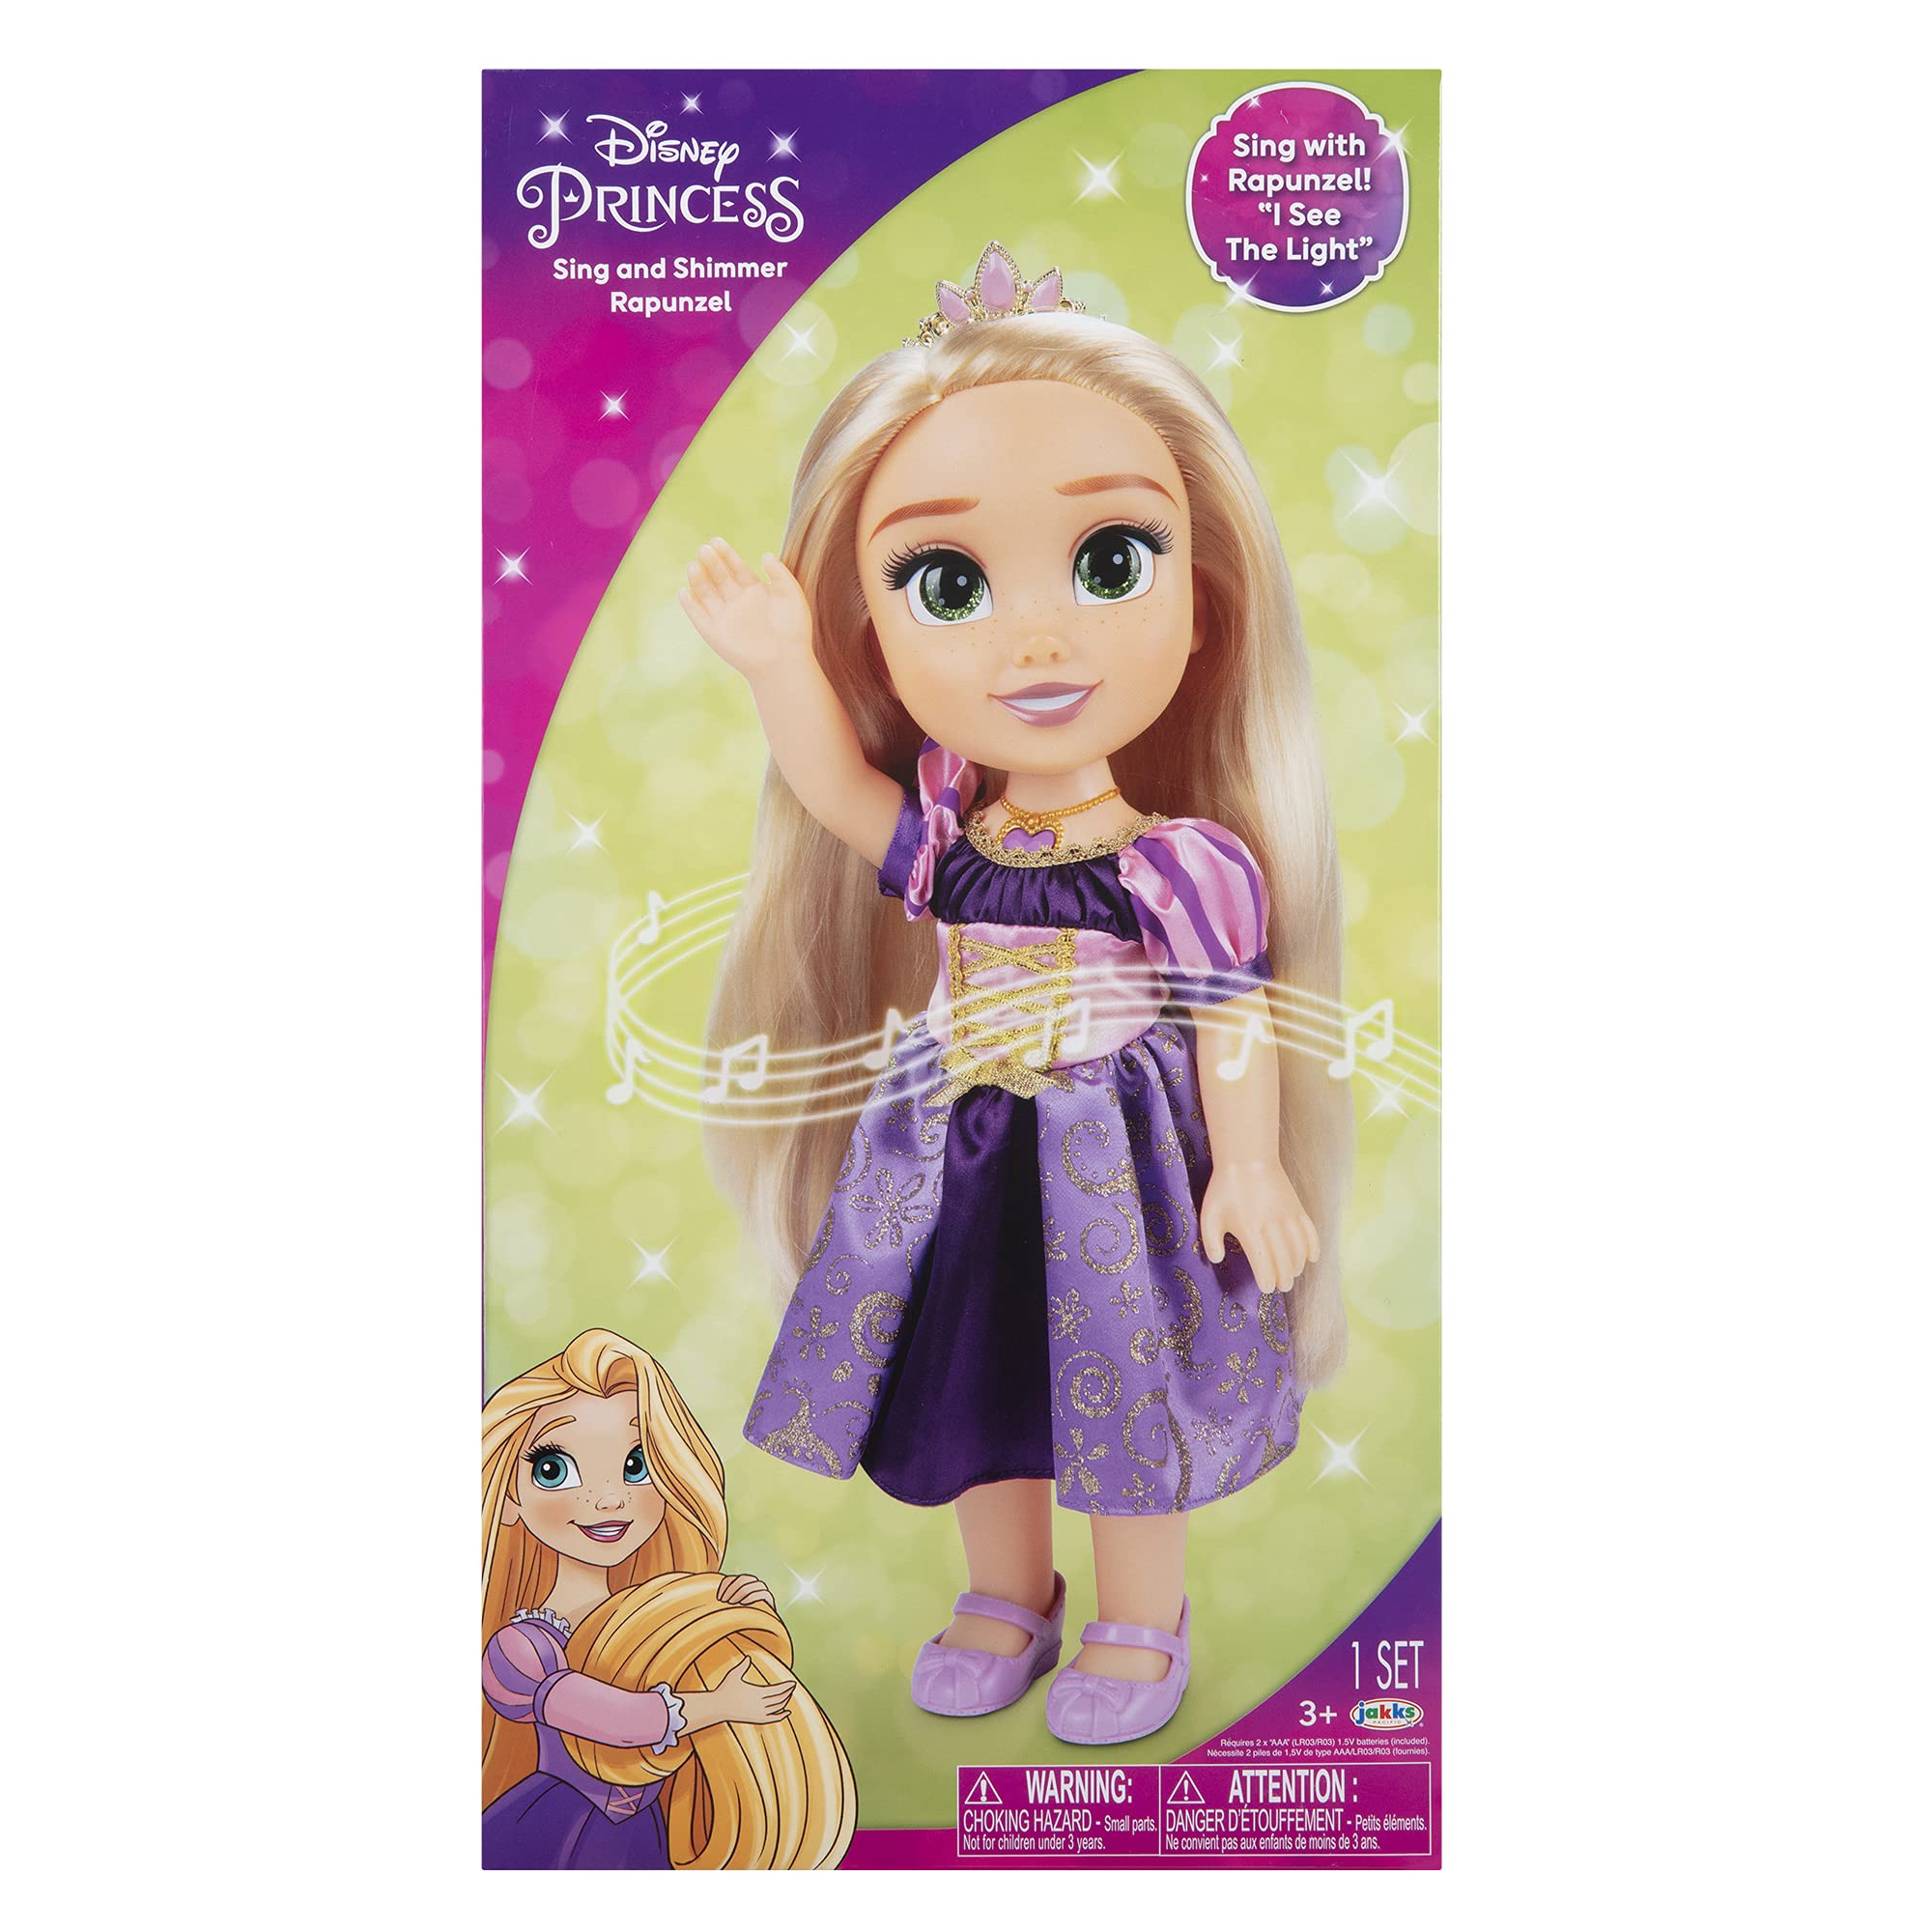 Disney Princess Rapunzel Doll Sing & Shimmer Toddler Doll, Sings I See The Light [Amazon Exclusive]